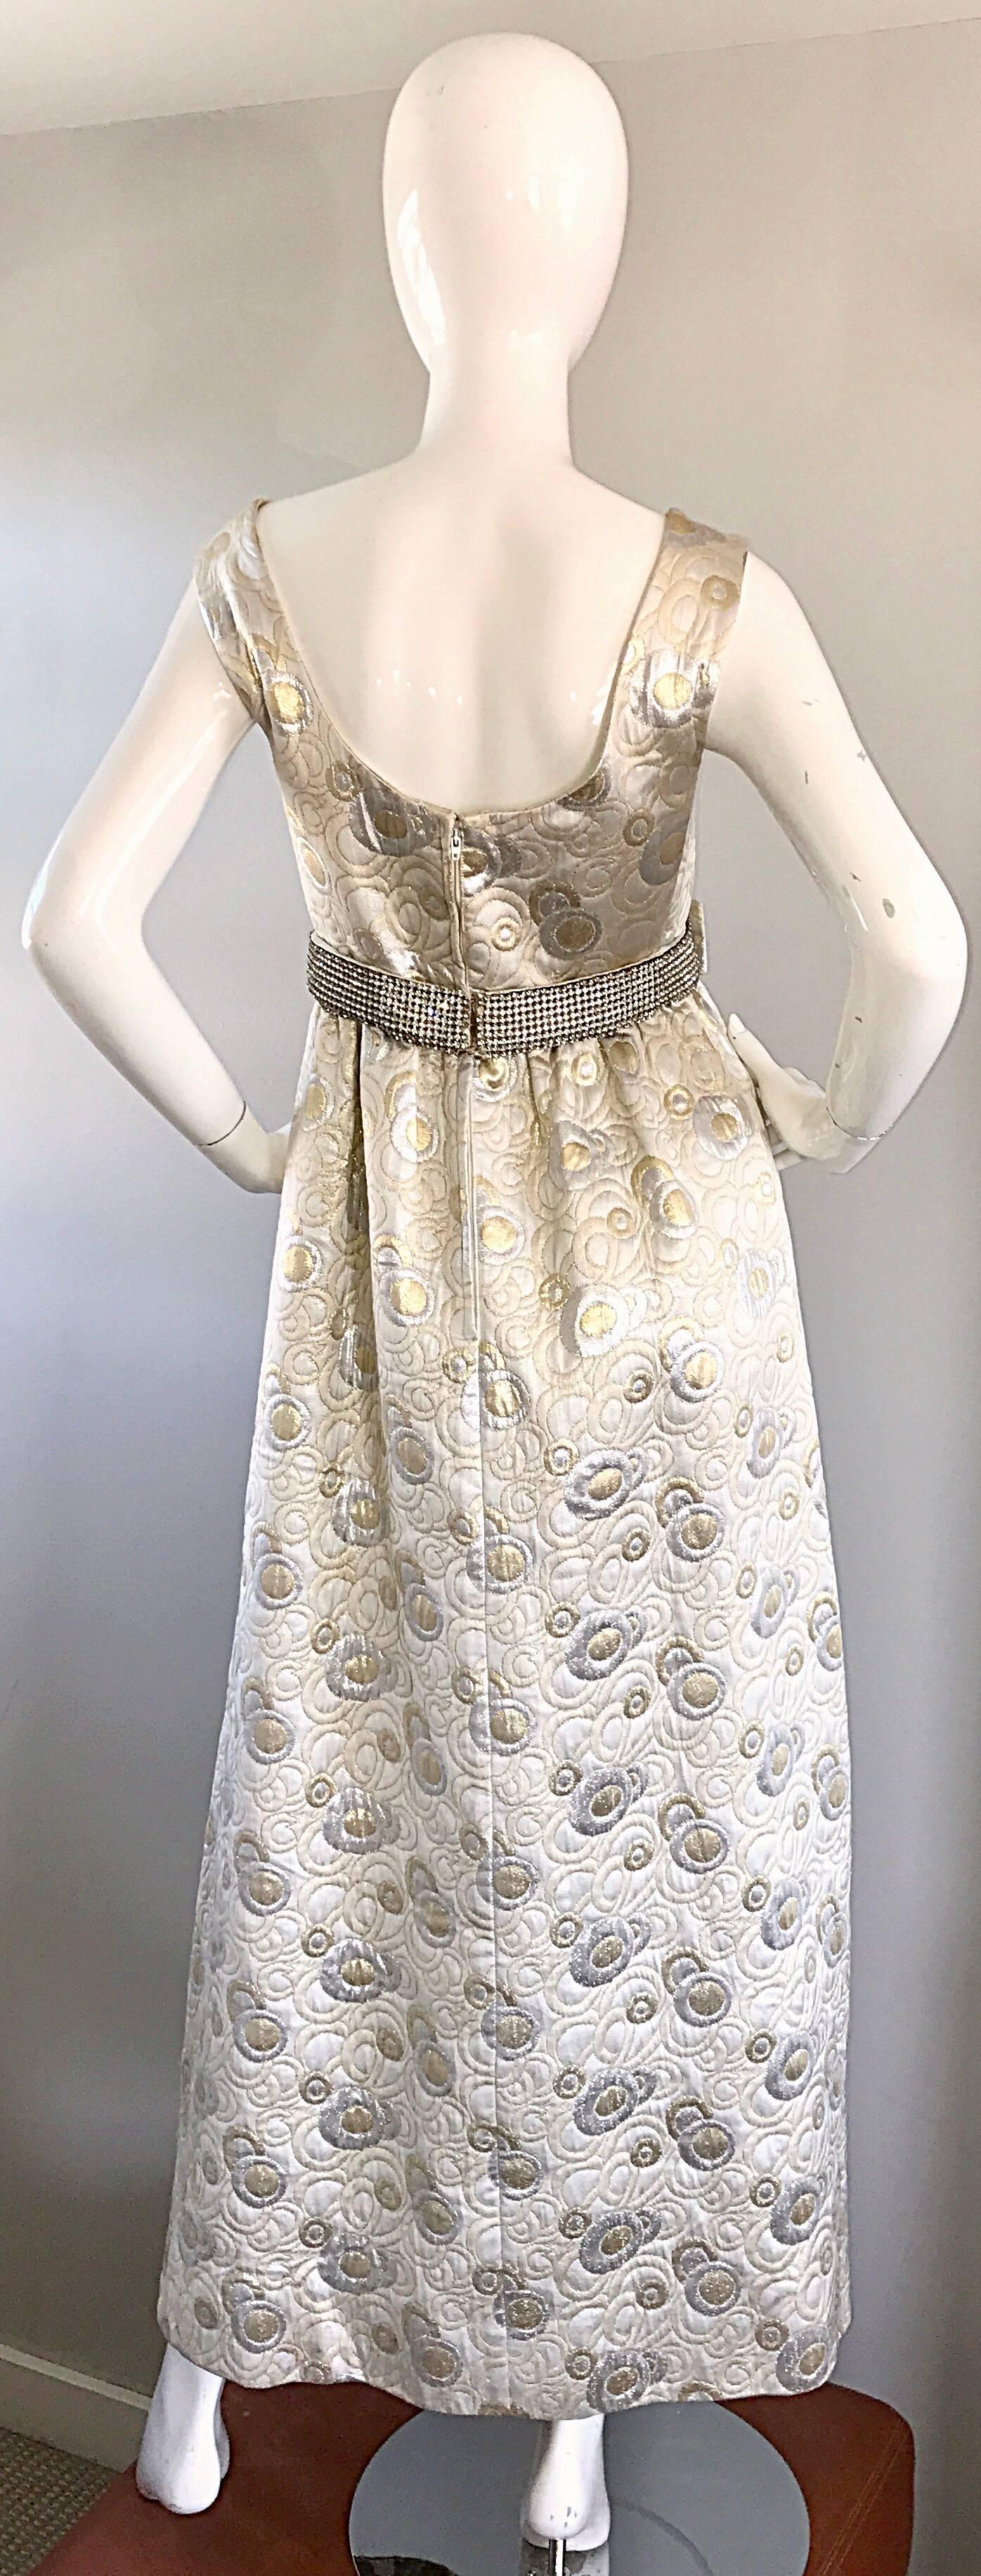 Women's Amazing 1960s Demi Couture Silver and Gold Silk Brocade Rhinestone Vintage Gown